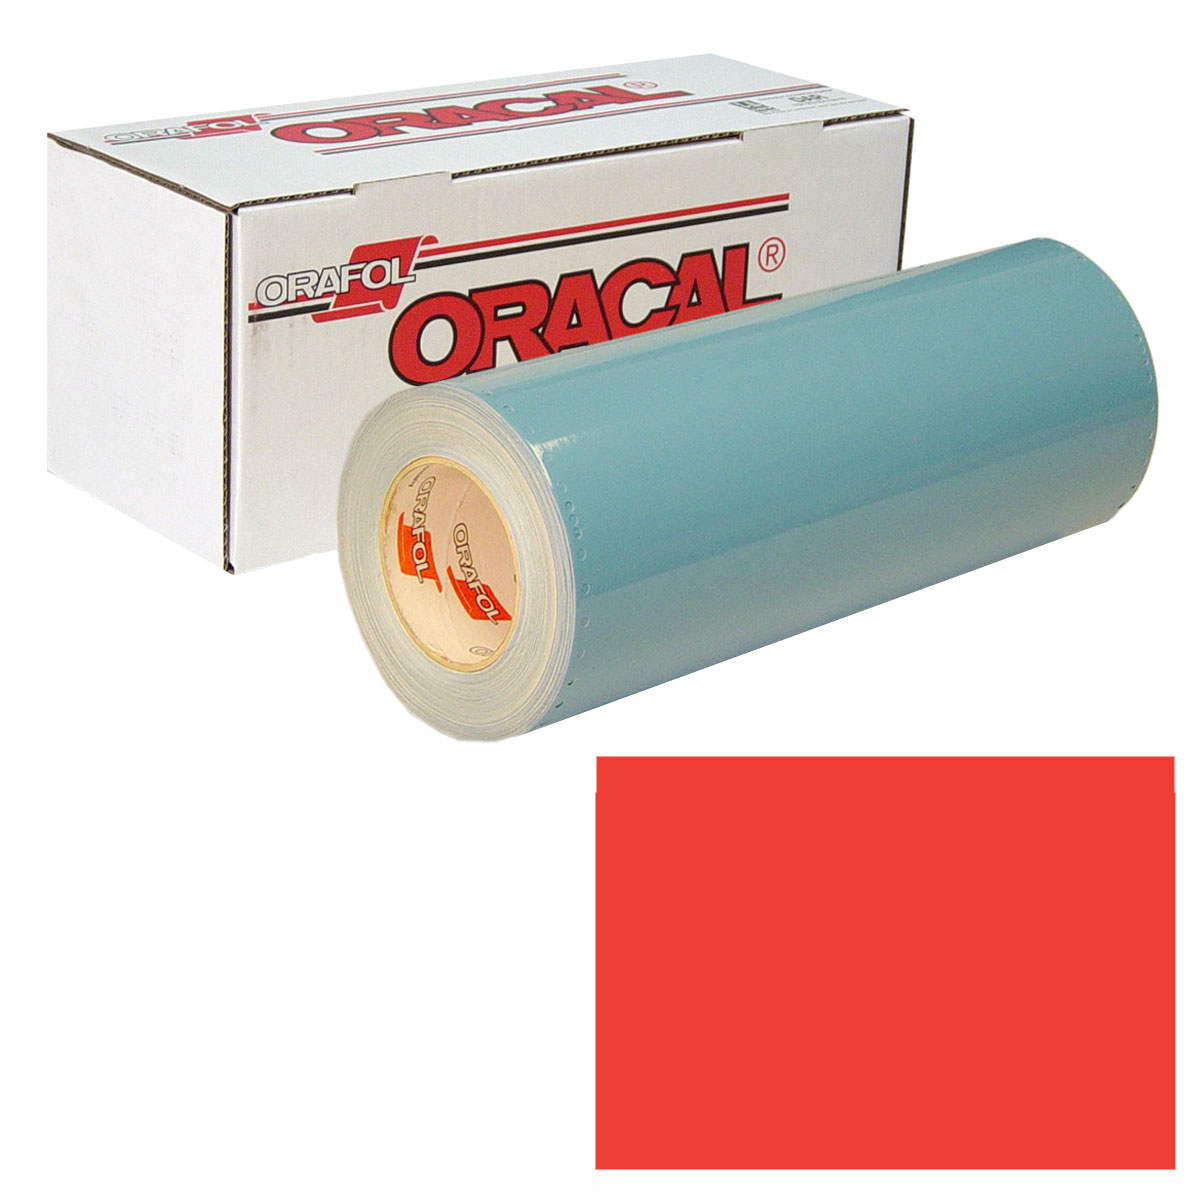 ORACAL 751 15in X 50yd 326 Signal Red